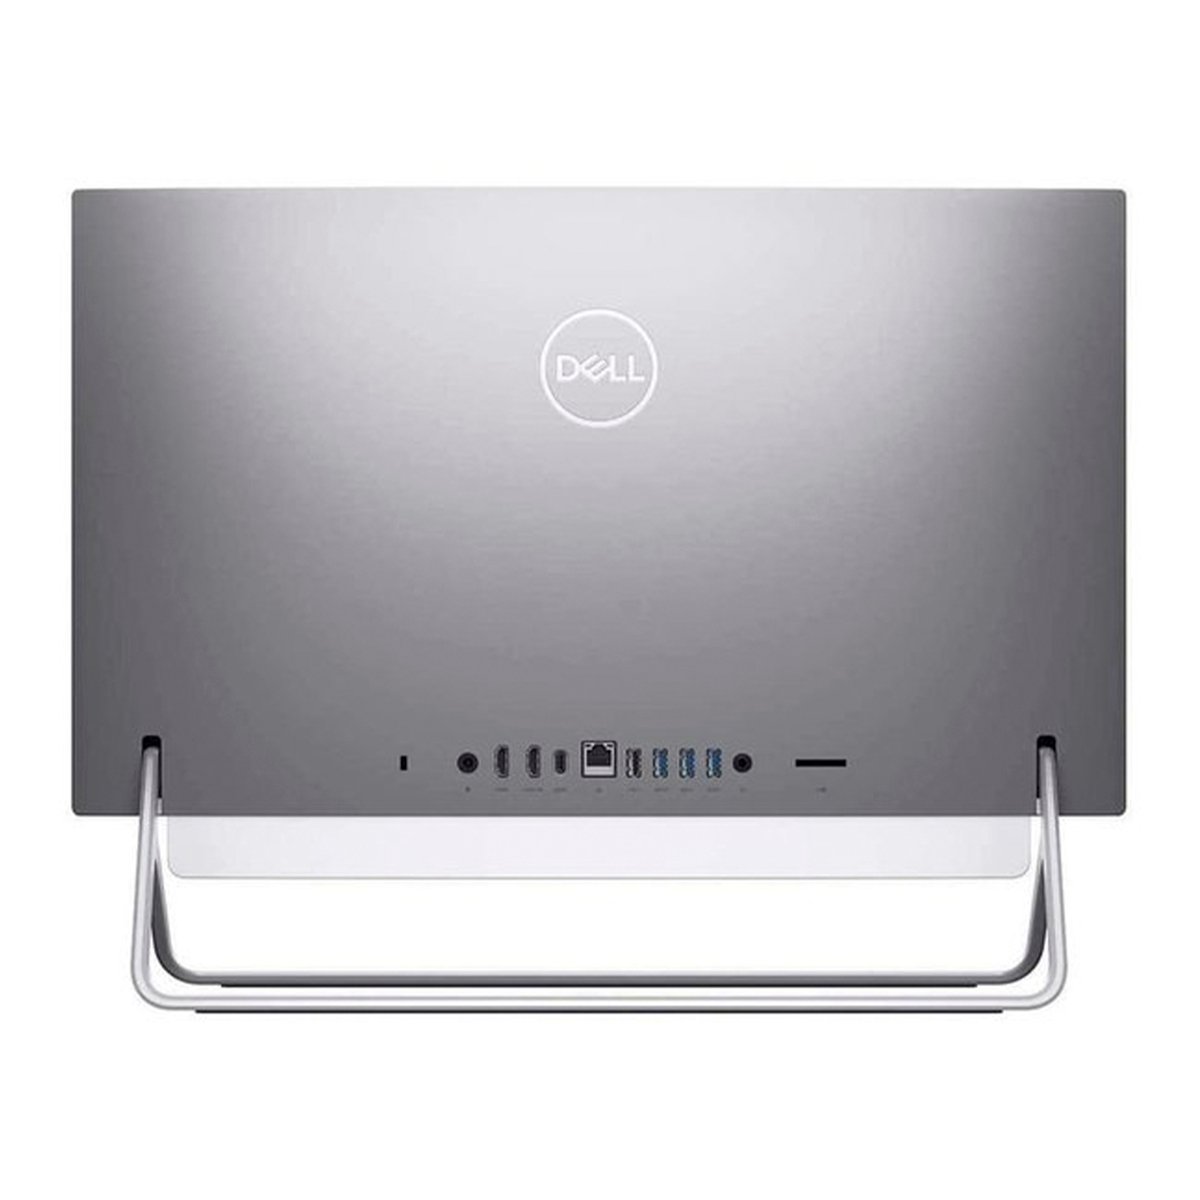 Dell All-in-One Desktop-5400-INS-6000-SLV-Corei7-1165G7,16GBRAM,1TB HDD,256 GB SSD,23.8" FHD Touch Display,Windows 10,Silver